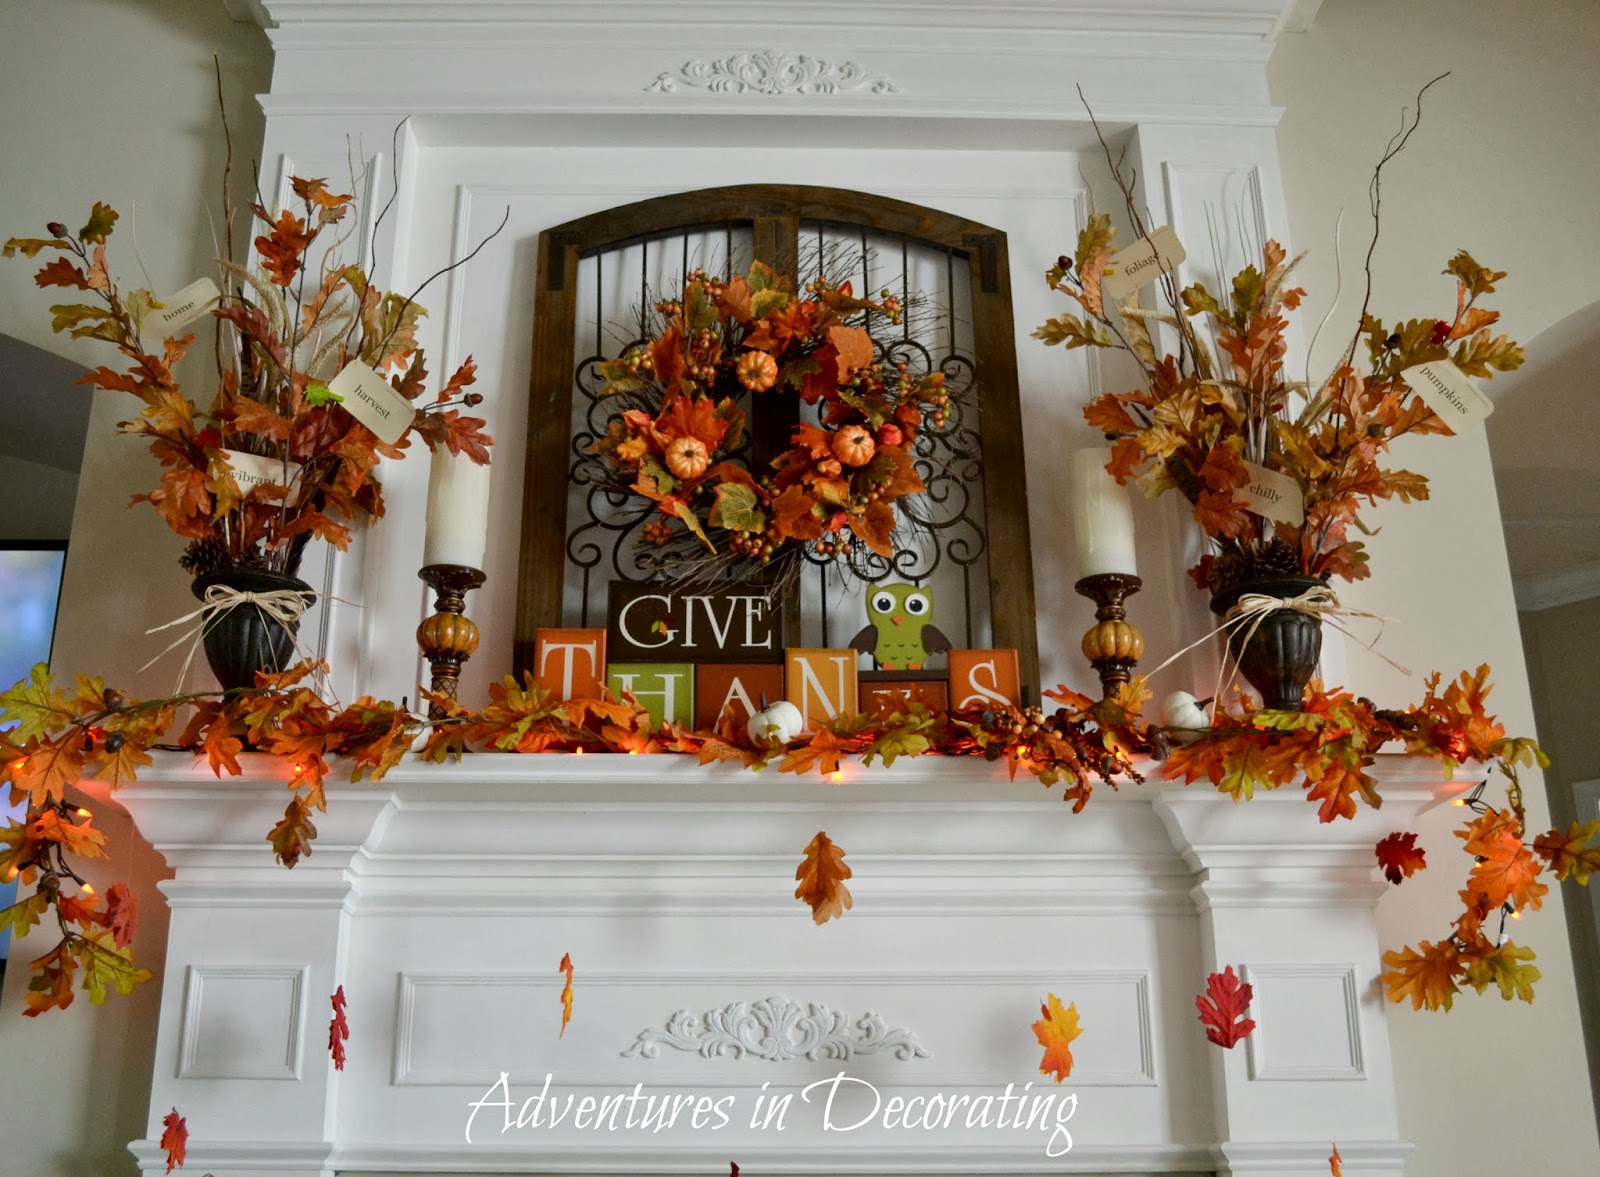 Adventures in Decorating: Our Fall Mantel